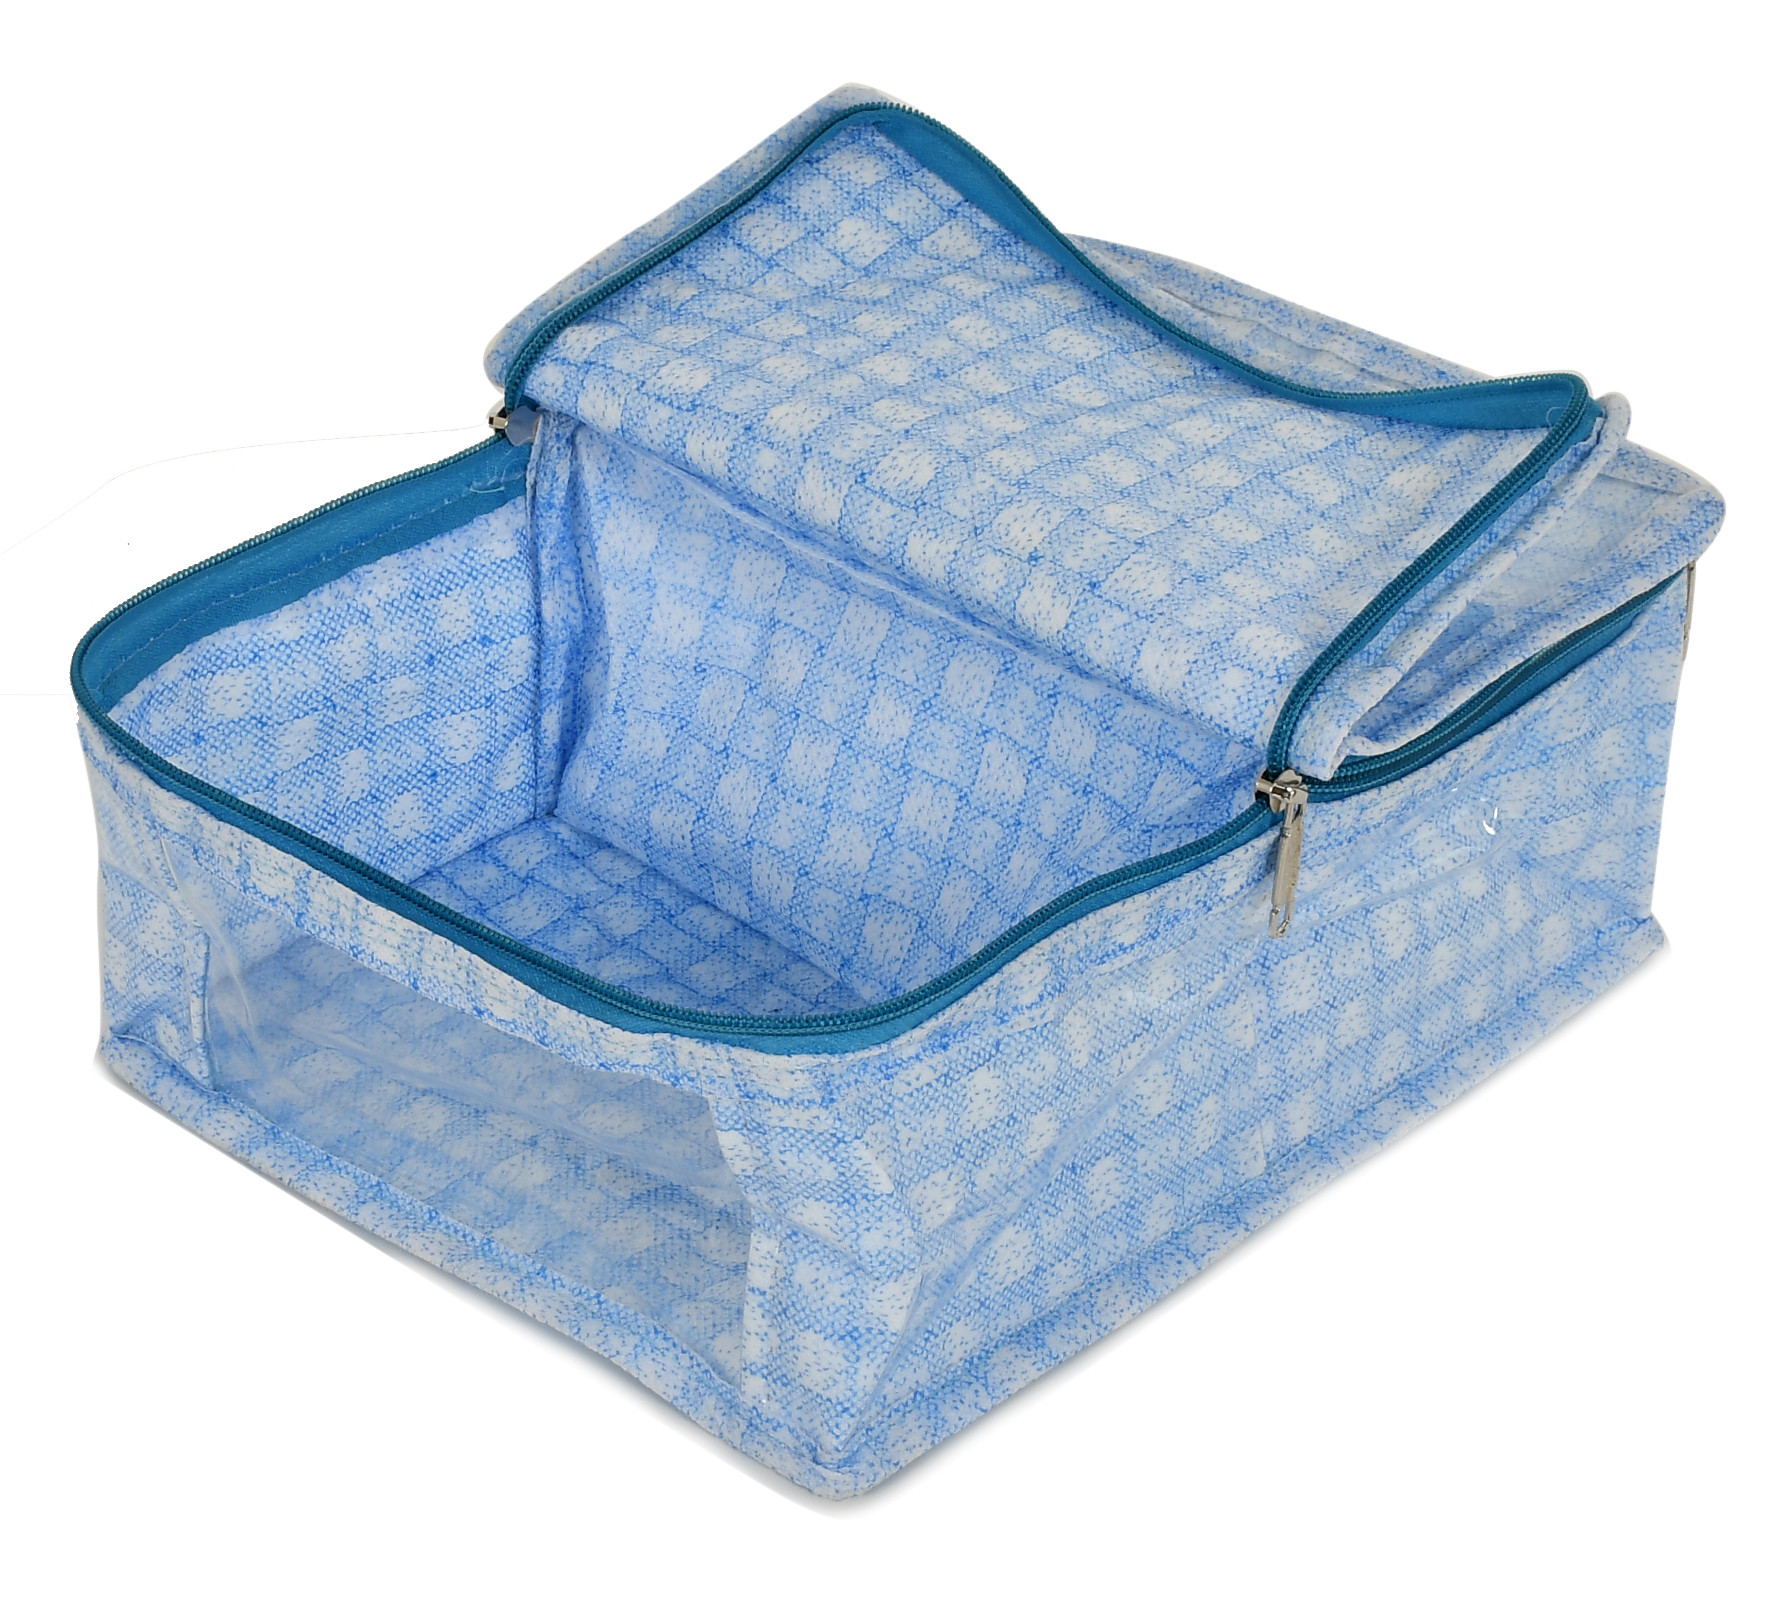 Kuber Industries Check Design Laminated PVC 2 Compartment Undergarments Organizer Bag, Storage Bag  Fits All Size Undergarments, Socks, Cosmetic, Toiletry kit With Tranasparent Window (Blue)-HS_38_KUBMART21265